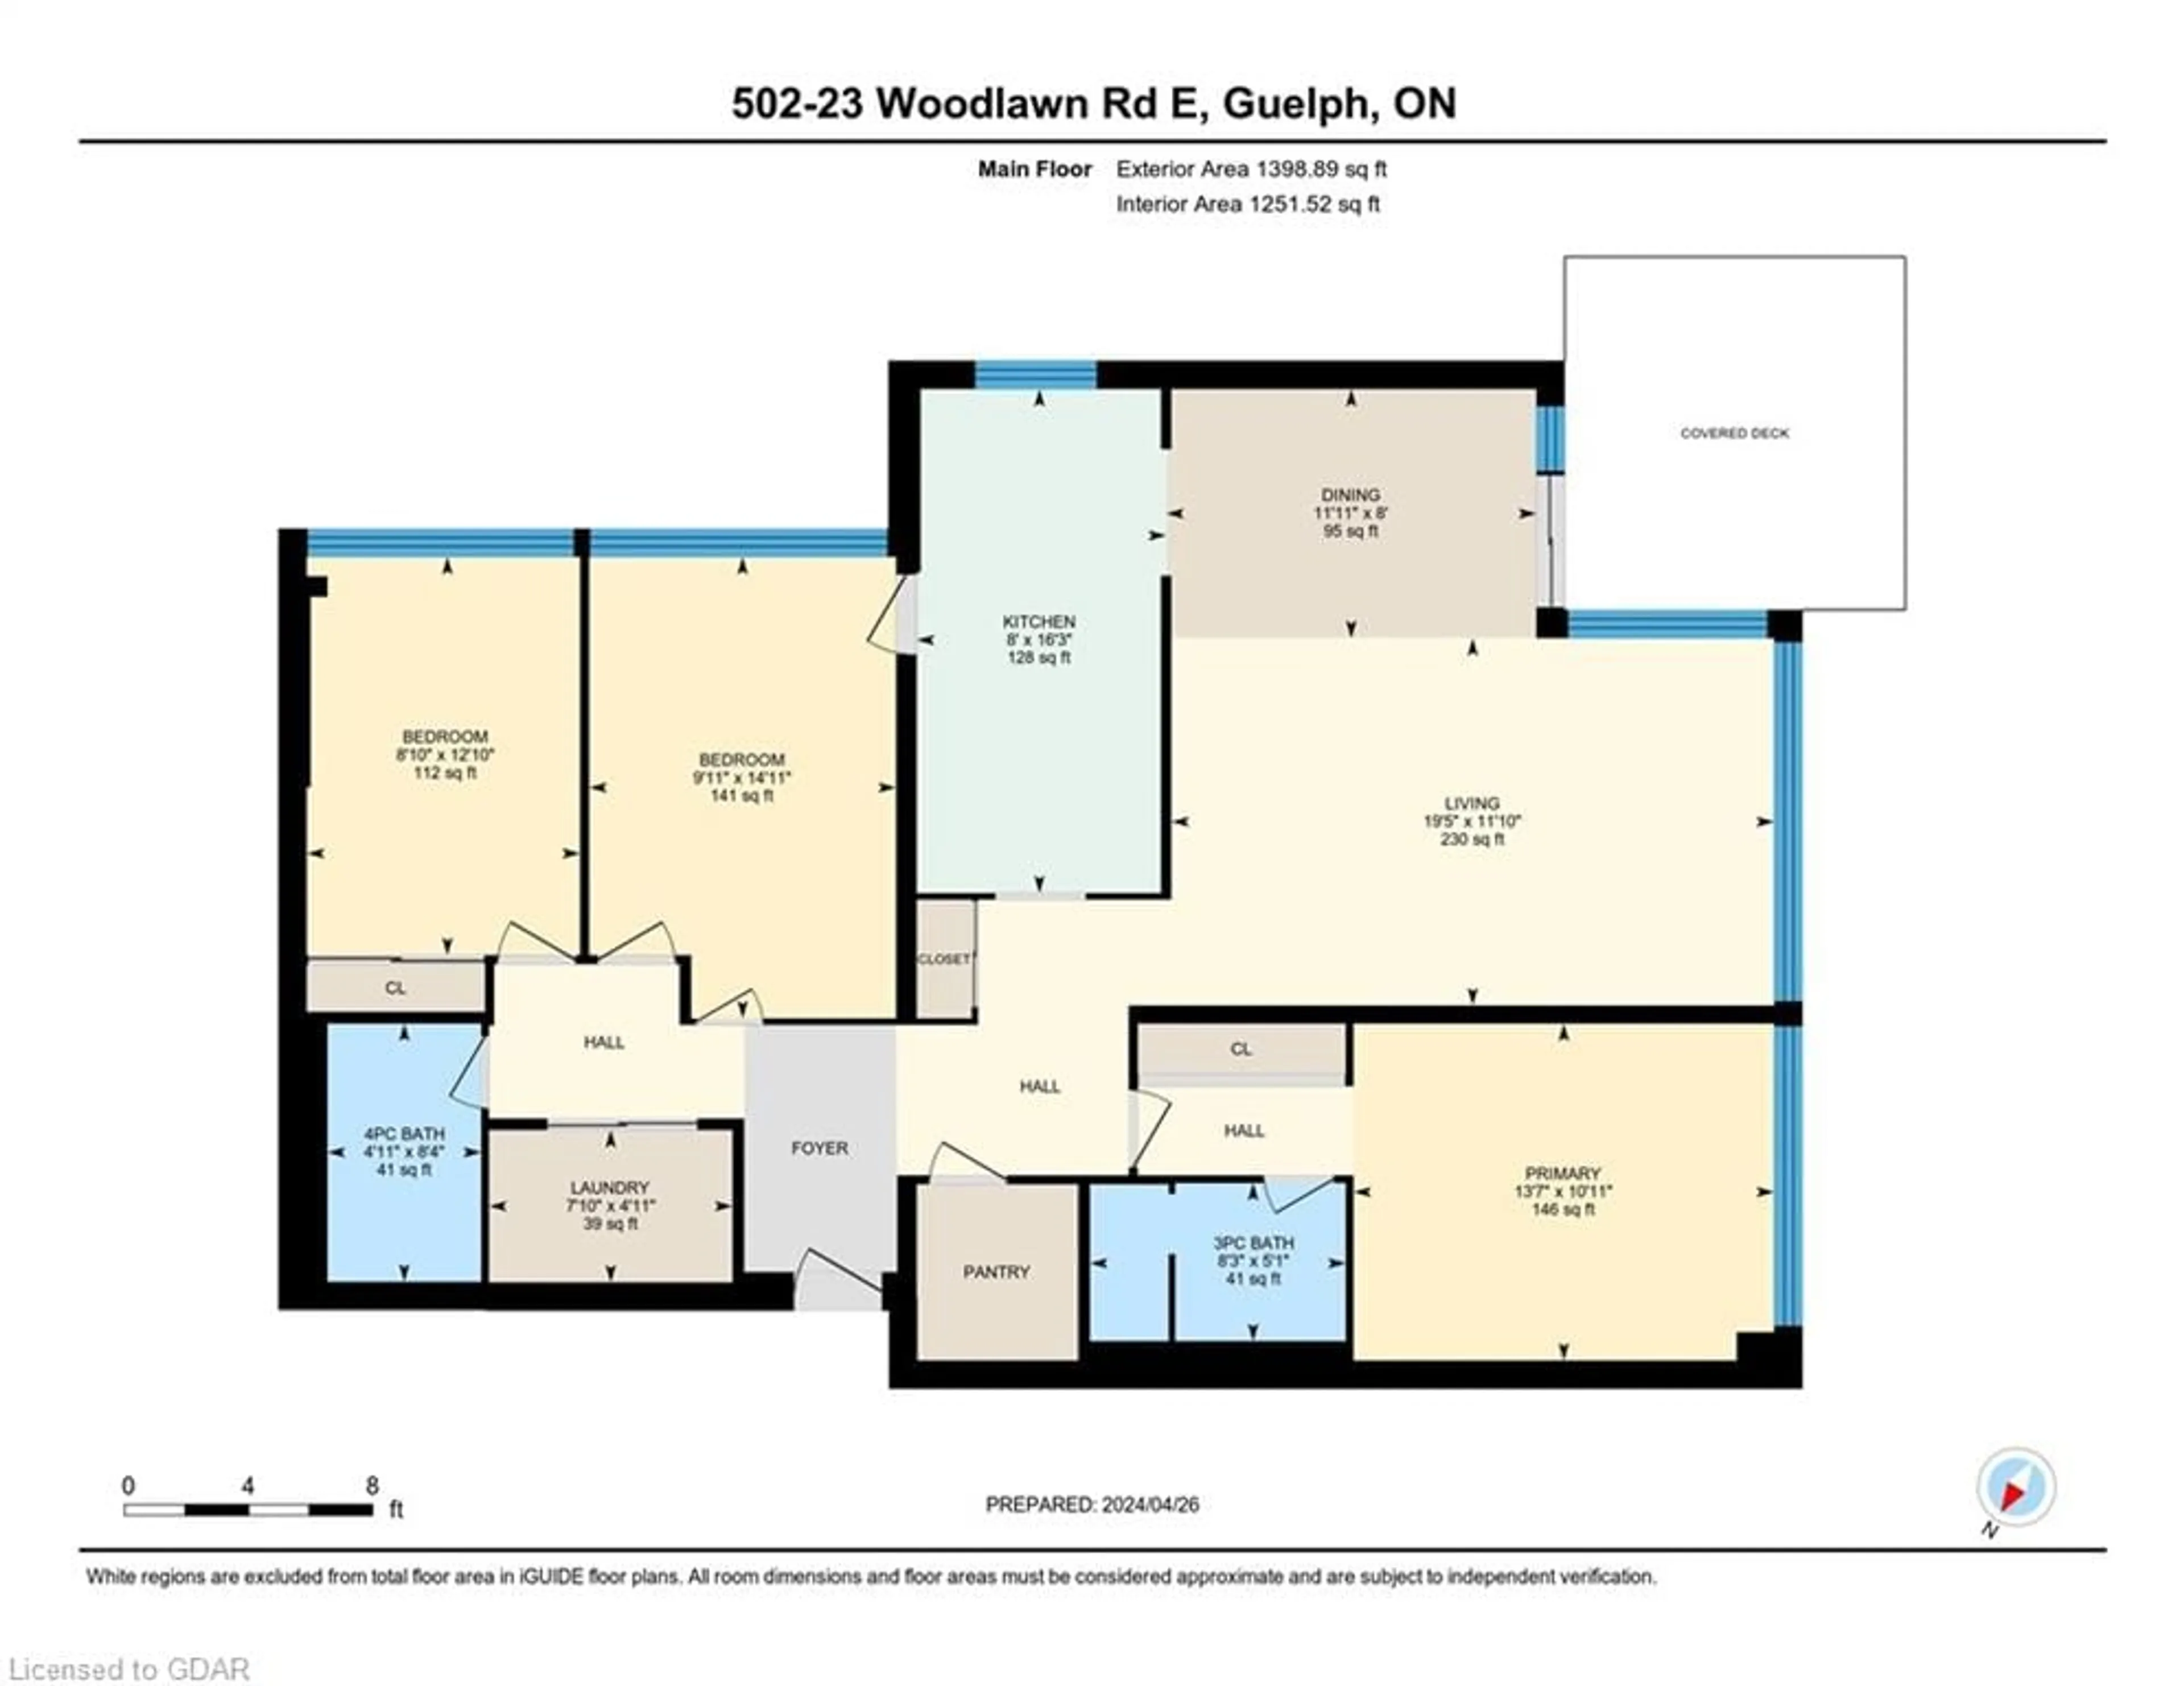 Floor plan for 23 Woodlawn Rd #502, Guelph Ontario N1H 7G6